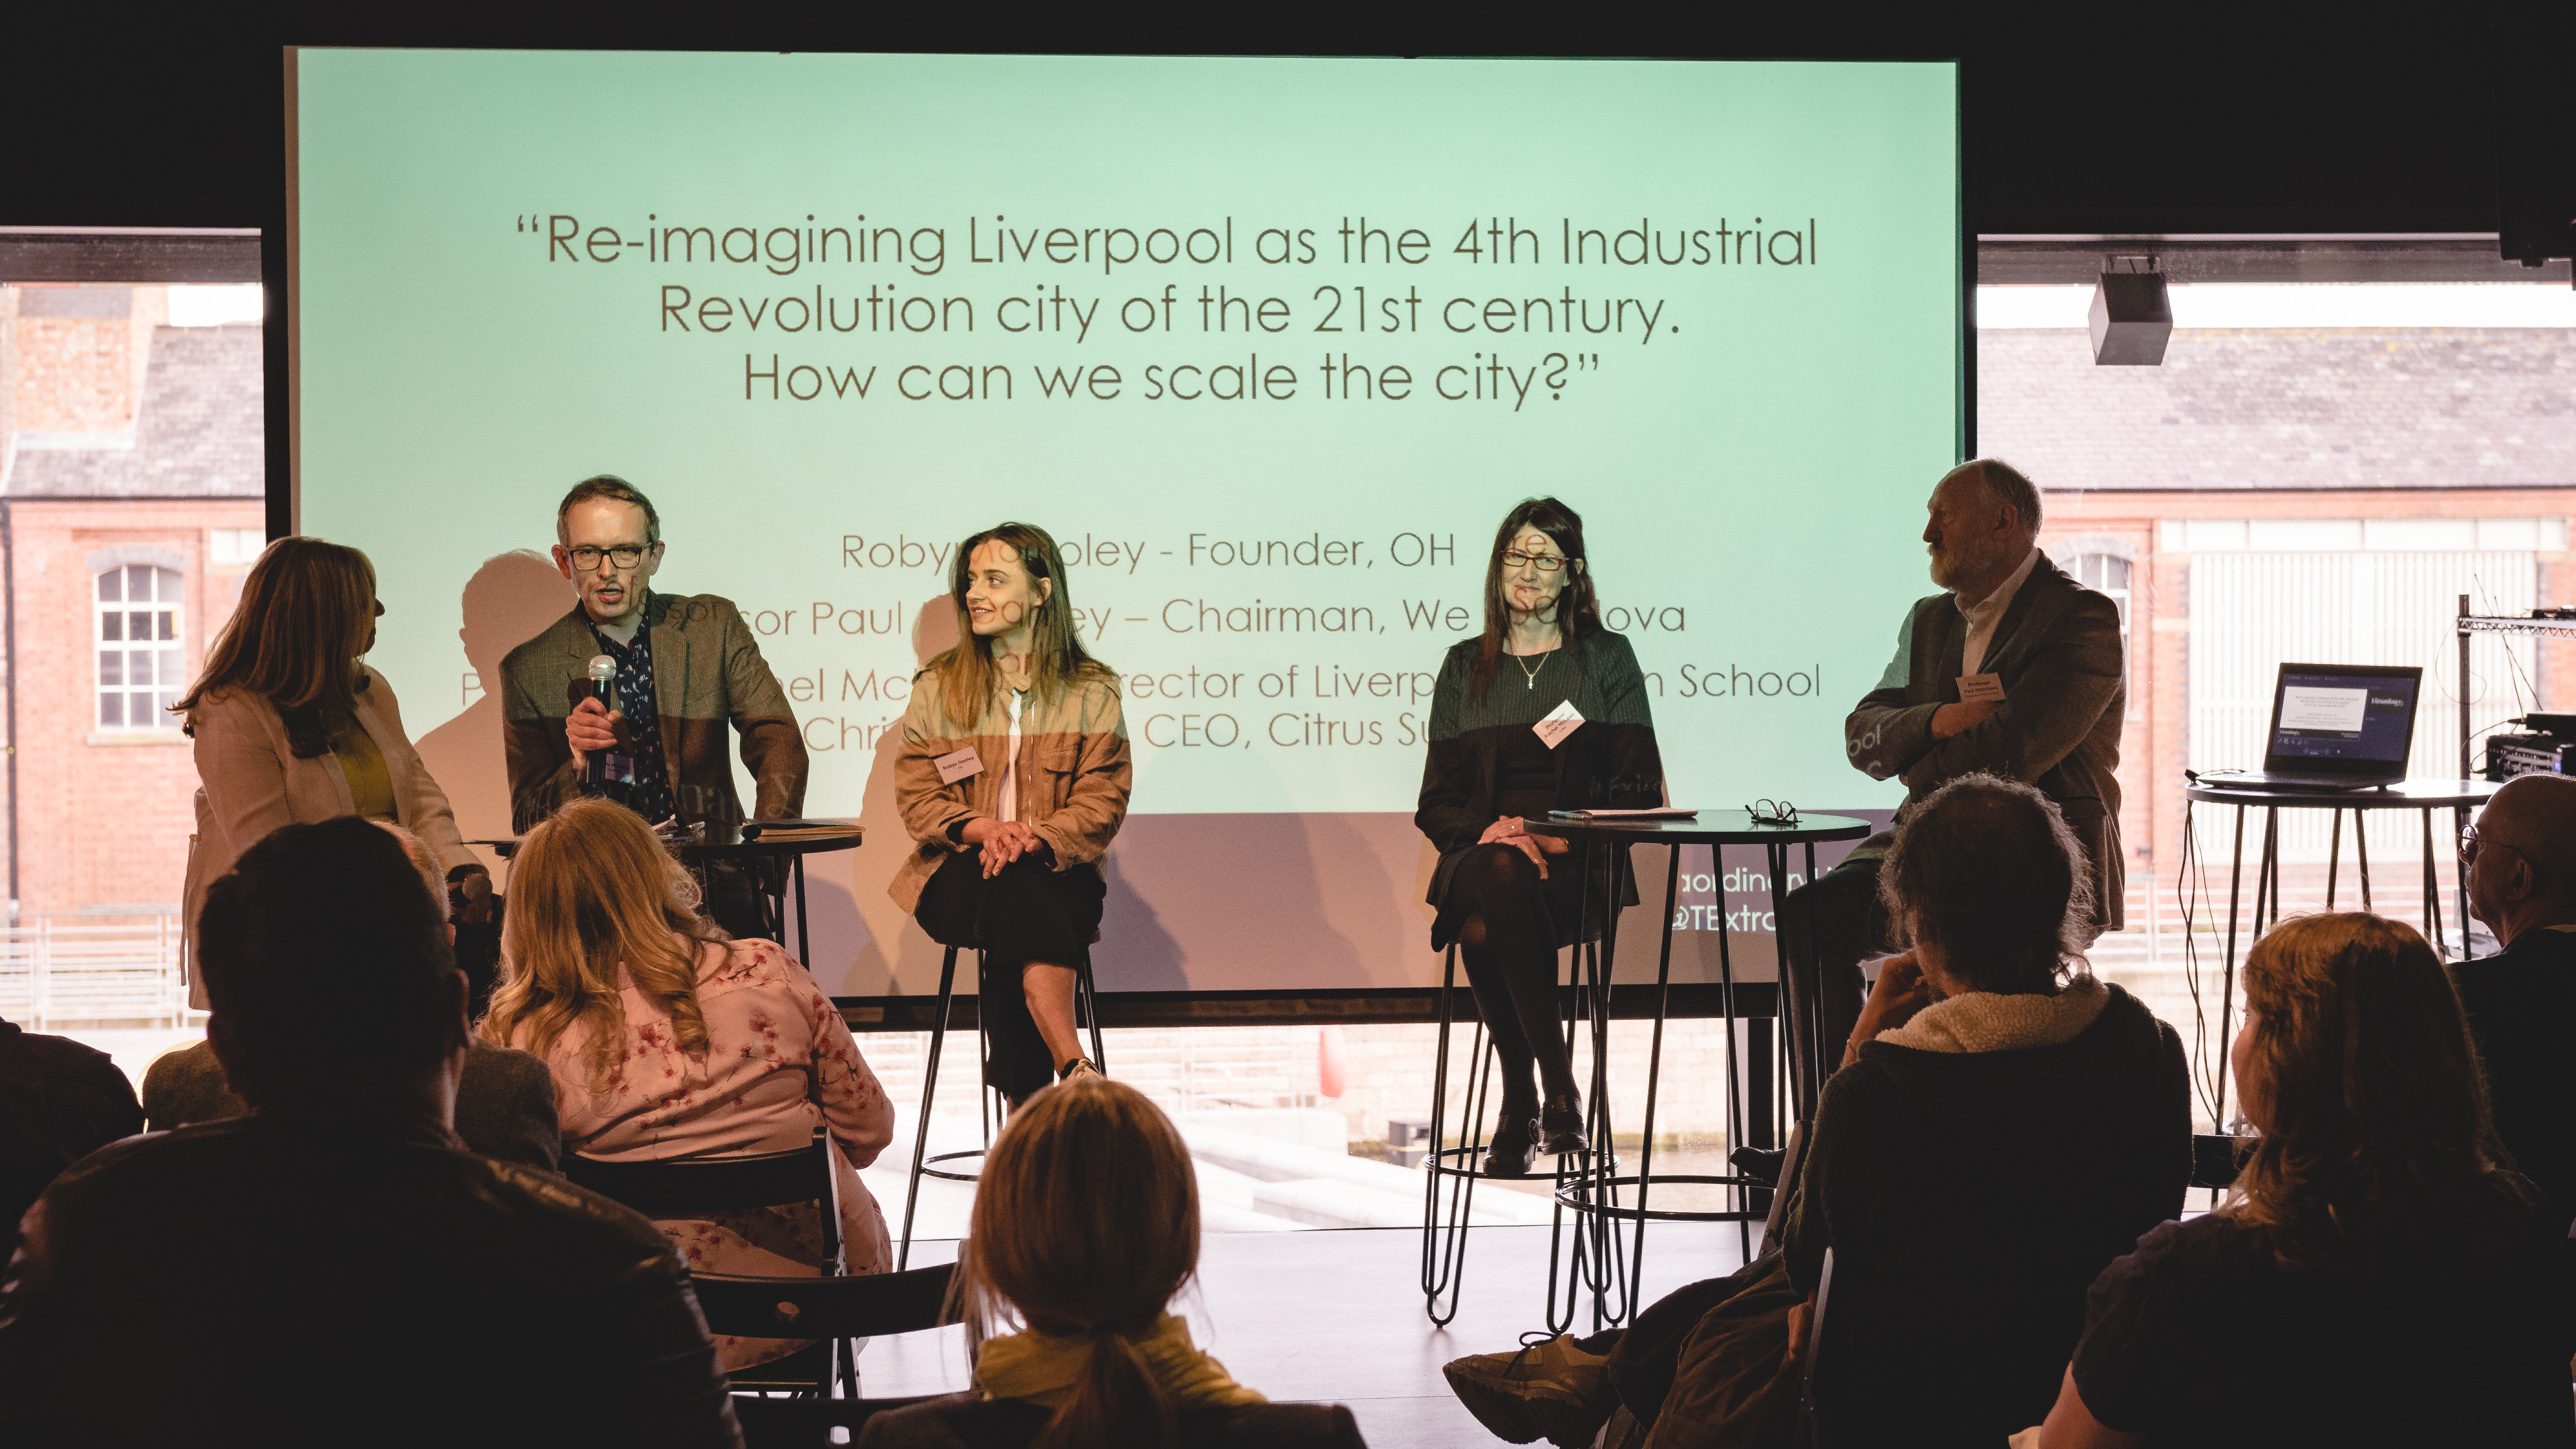 Panel speaking at The Extraordinary Club Launch Event in Liverpool